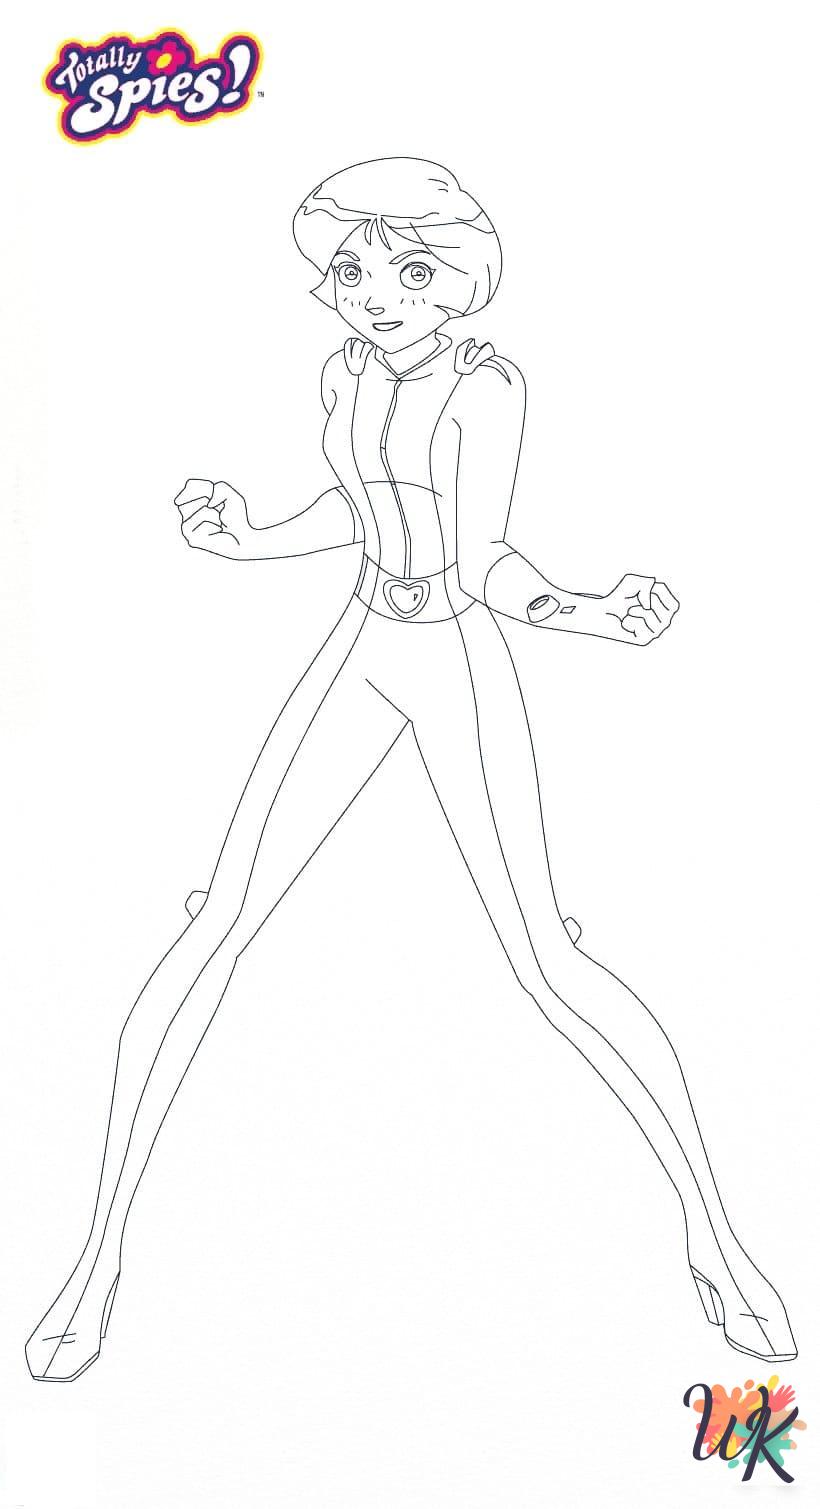 Totally Spies coloring pages for adults